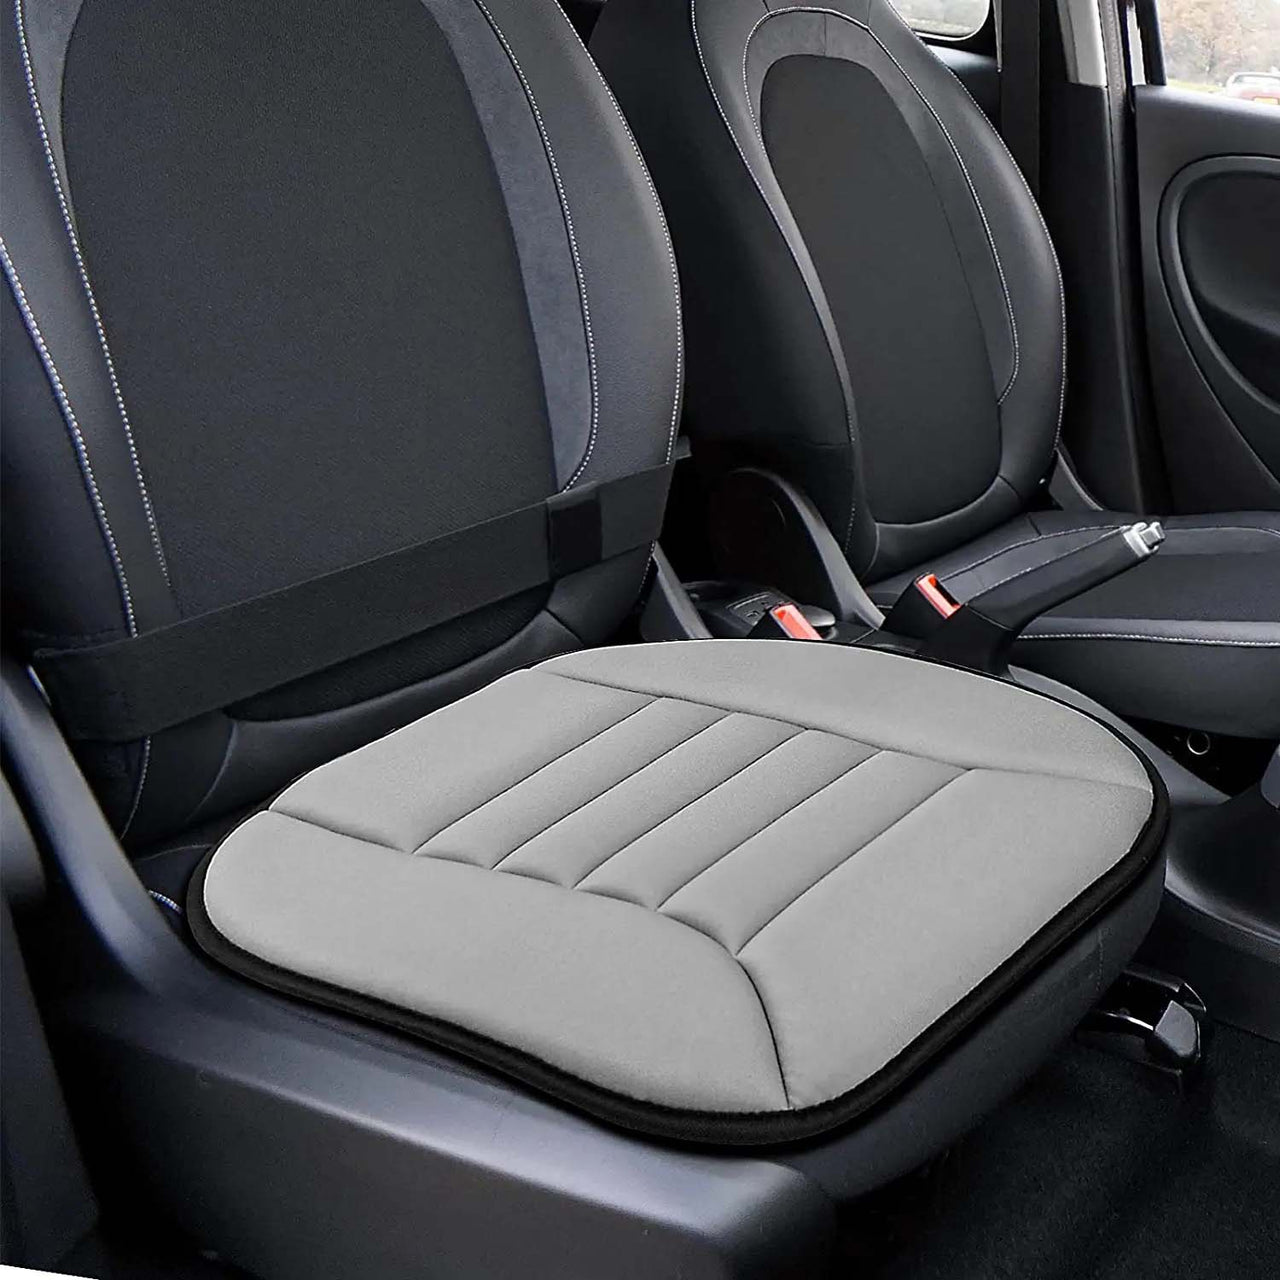 Car Seat Cushion with 1.2inch Comfort Memory Foam, Custom Fit For Your Cars, Seat Cushion for Car and Office Chair PF19989